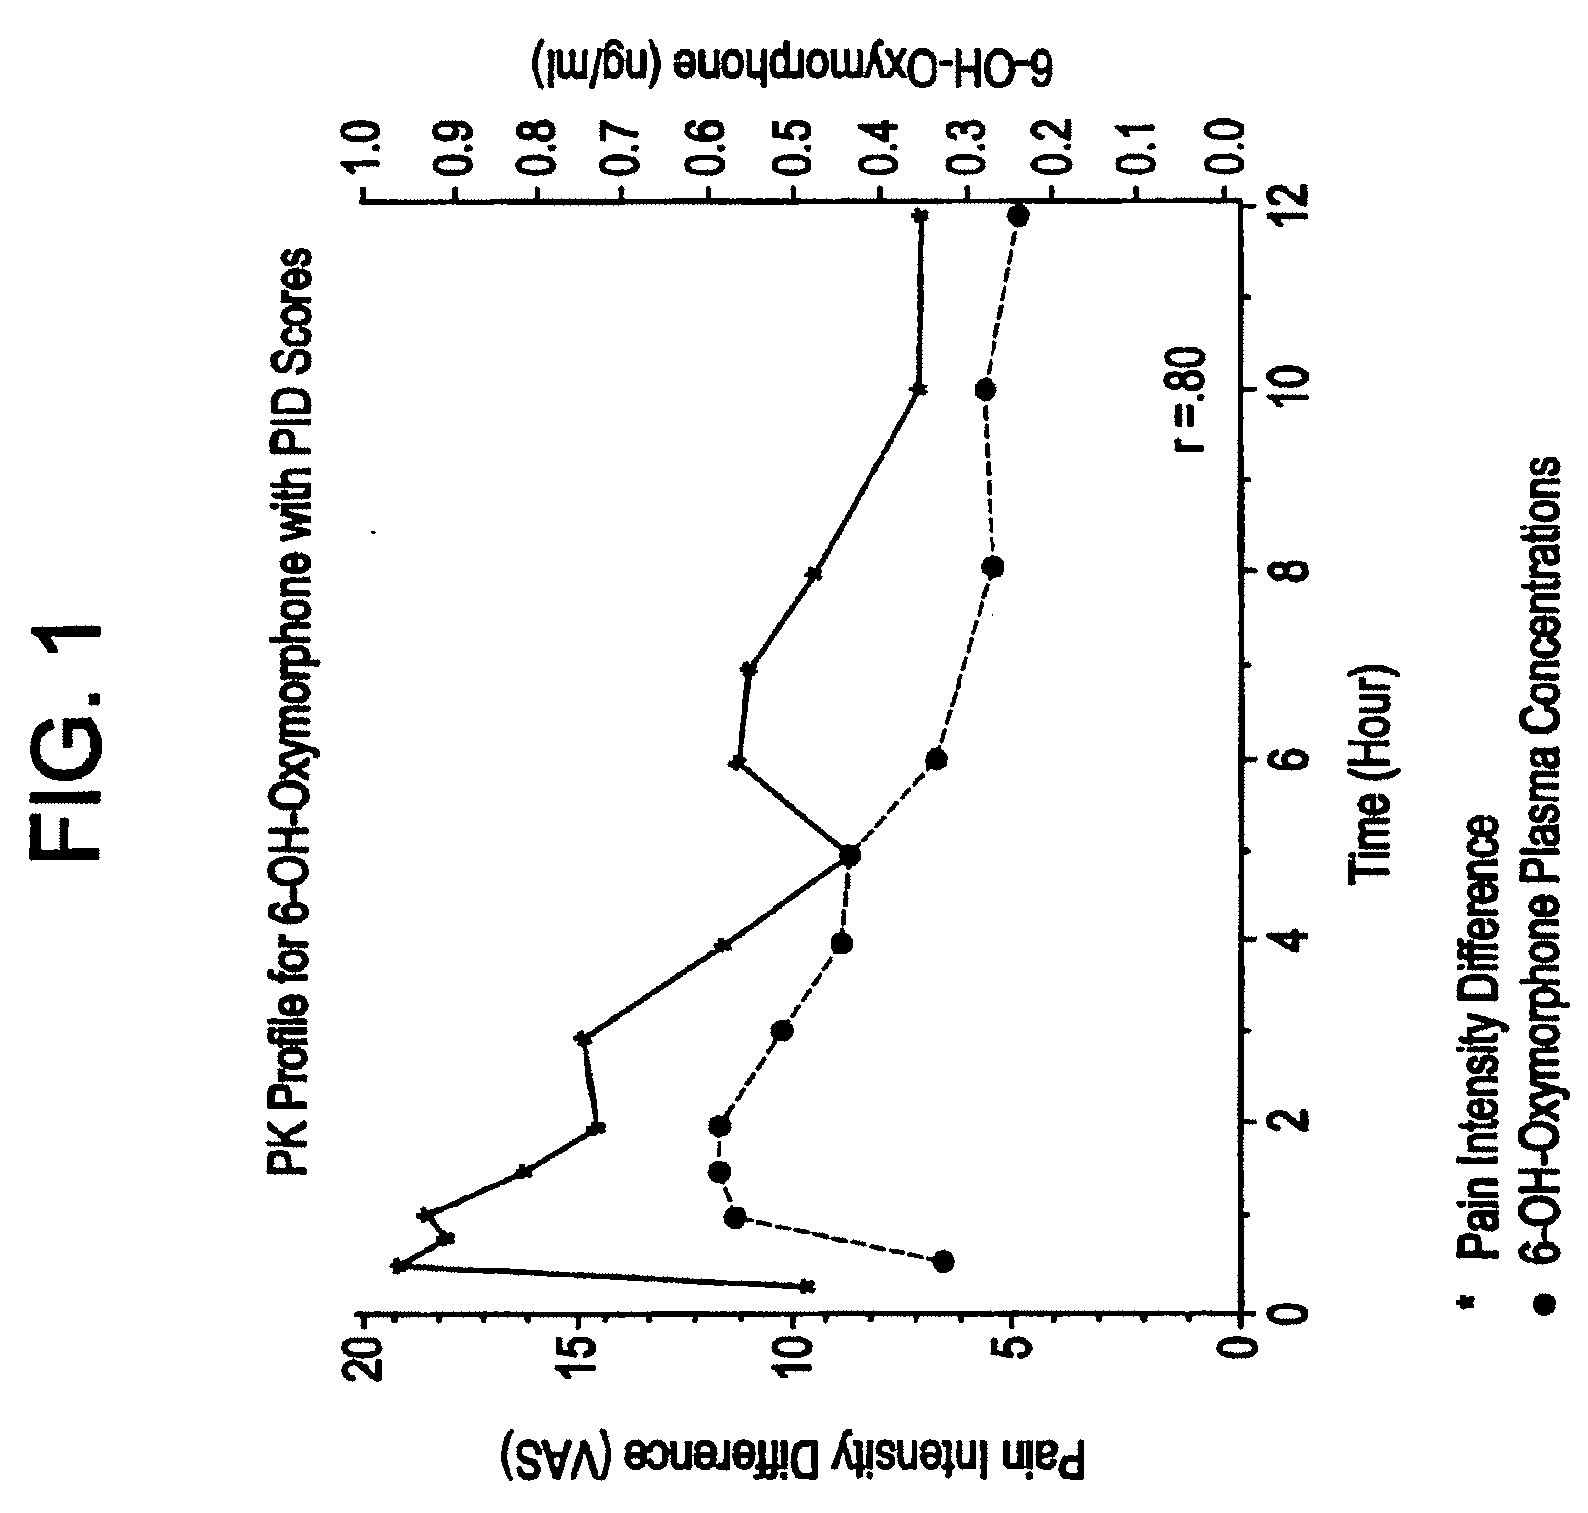 Method of Treating Pain Utilizing Controlled Release Oxymorphone Pharmaceutical Compositions and Instructions on Effects of Alcohol